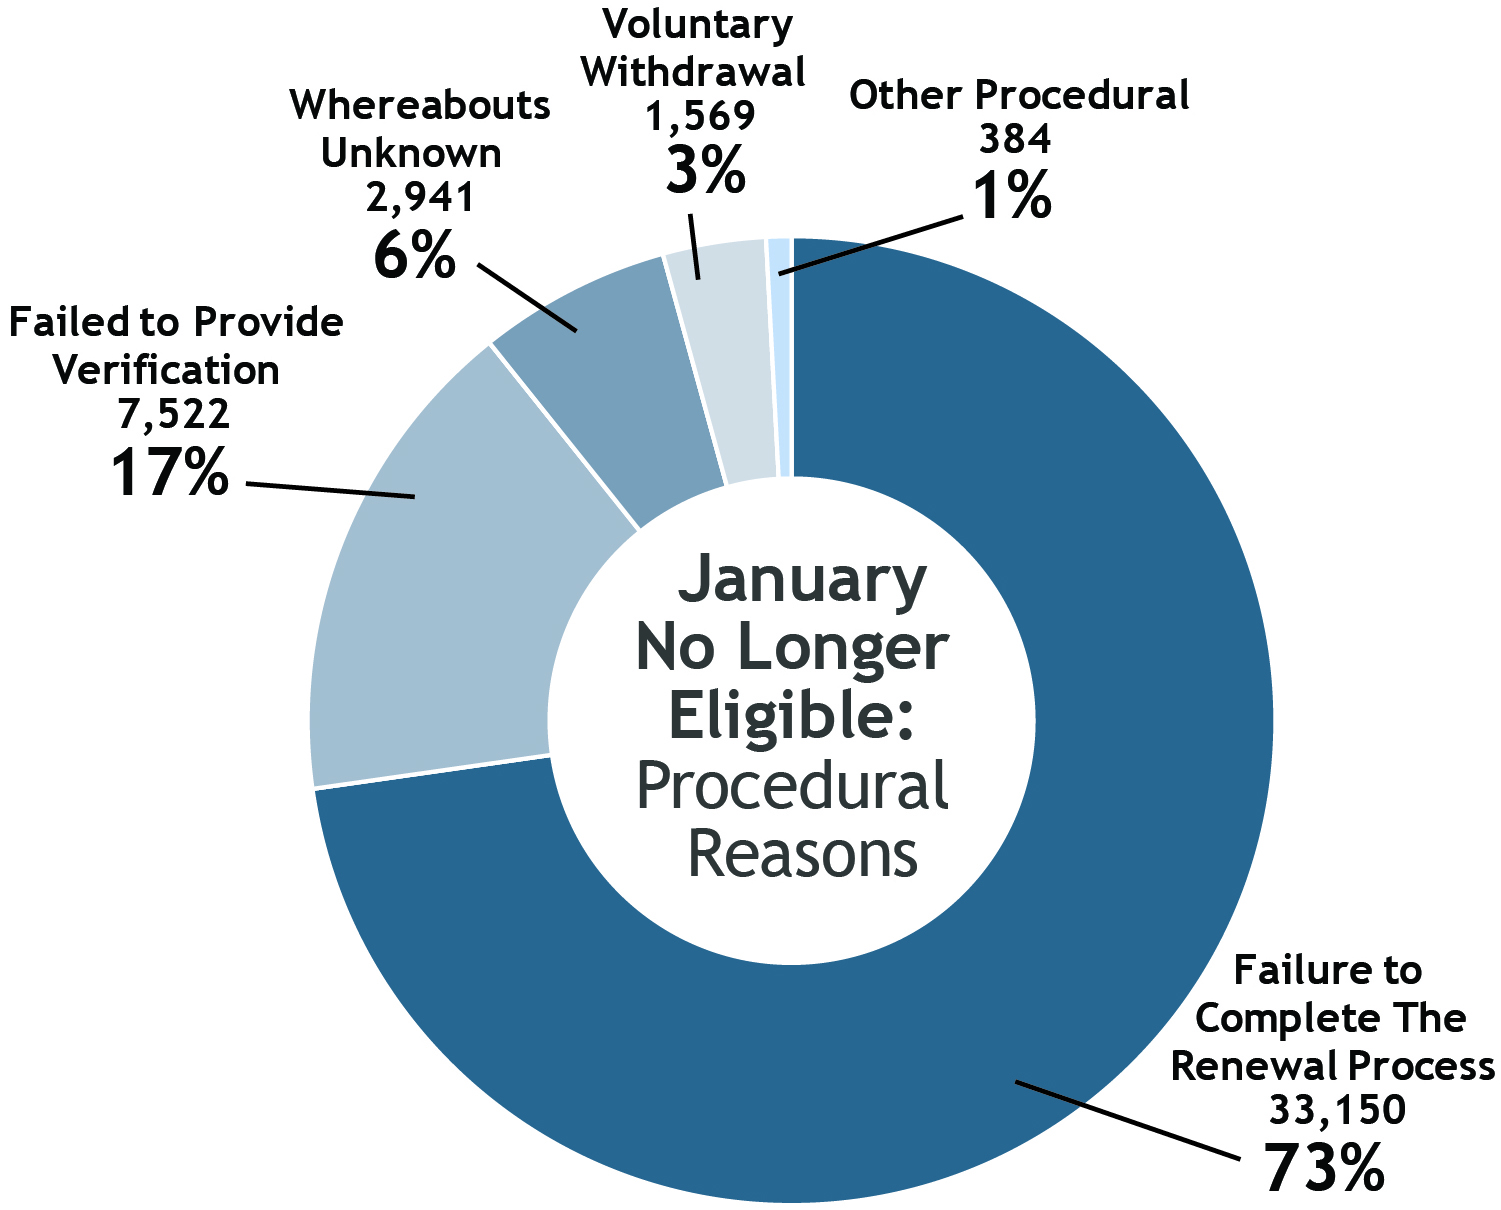 Donut chart showing detail of January Renewals section of No Longer Eligible for Procedural Reasons with failure to complete the renewal process 33,150 the largest at 73%, failed to provide verification 7,522 at 17%, whereabouts unknown 2,941 at 6%, voluntary withdrawal 1,569 at 3% and other procedural 384 at 1%.